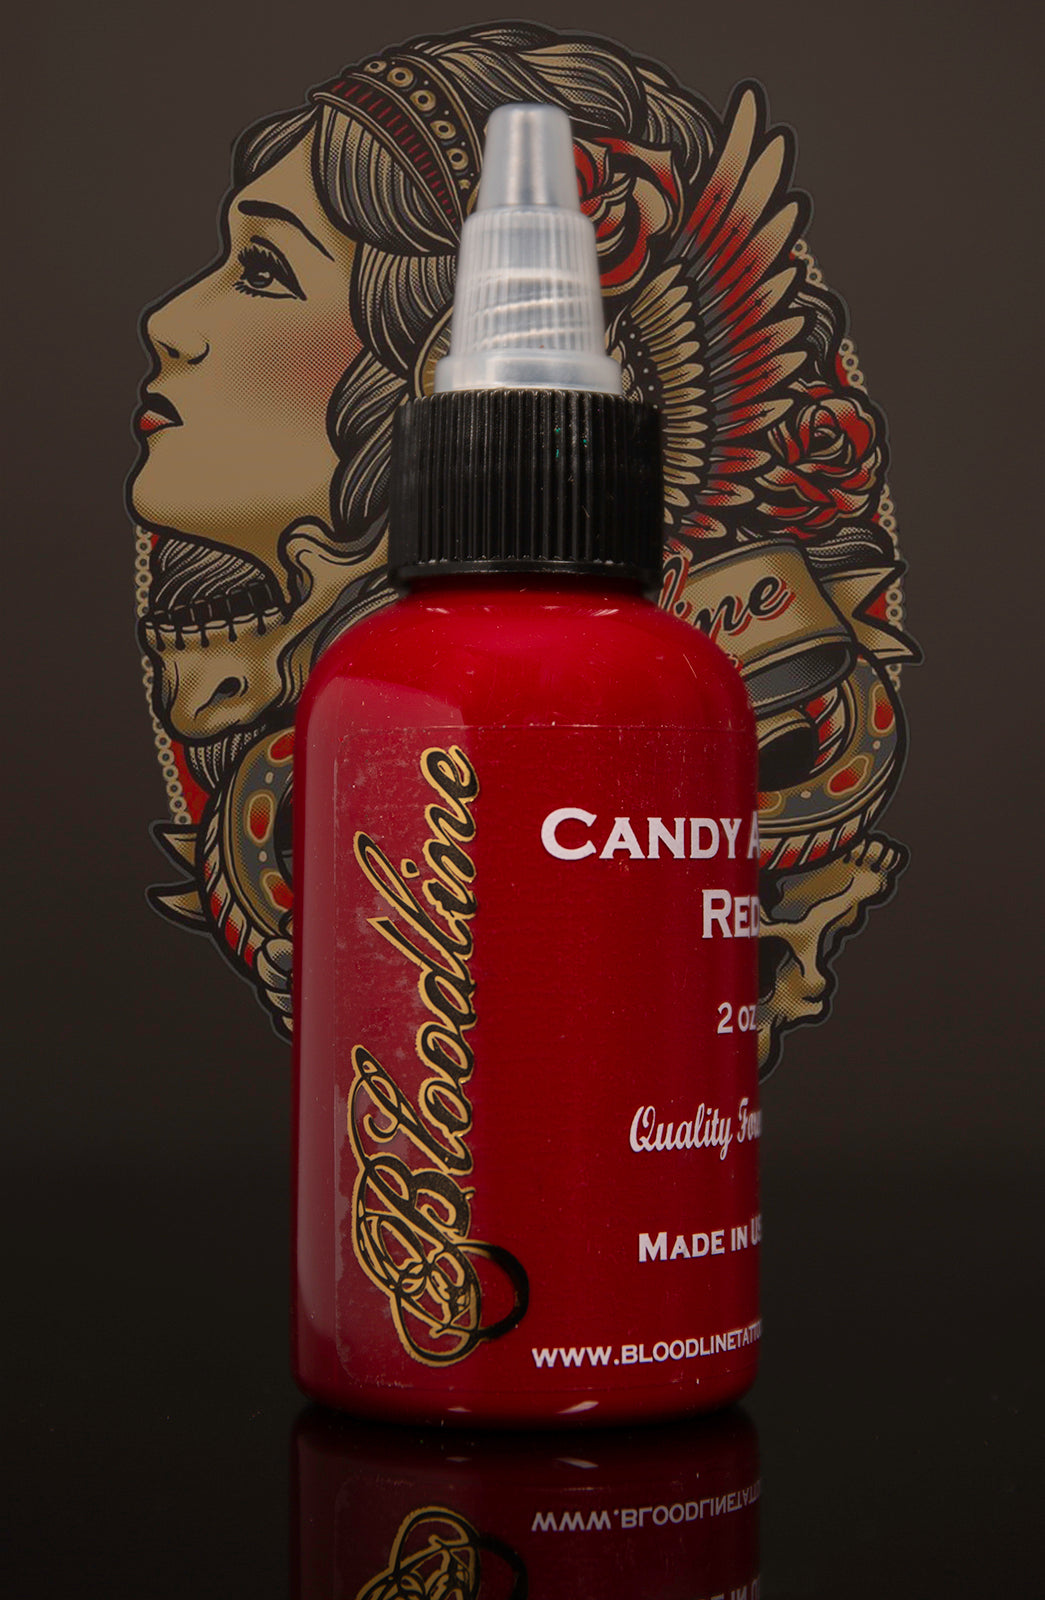 BLOODLINE - Candy Apple Red